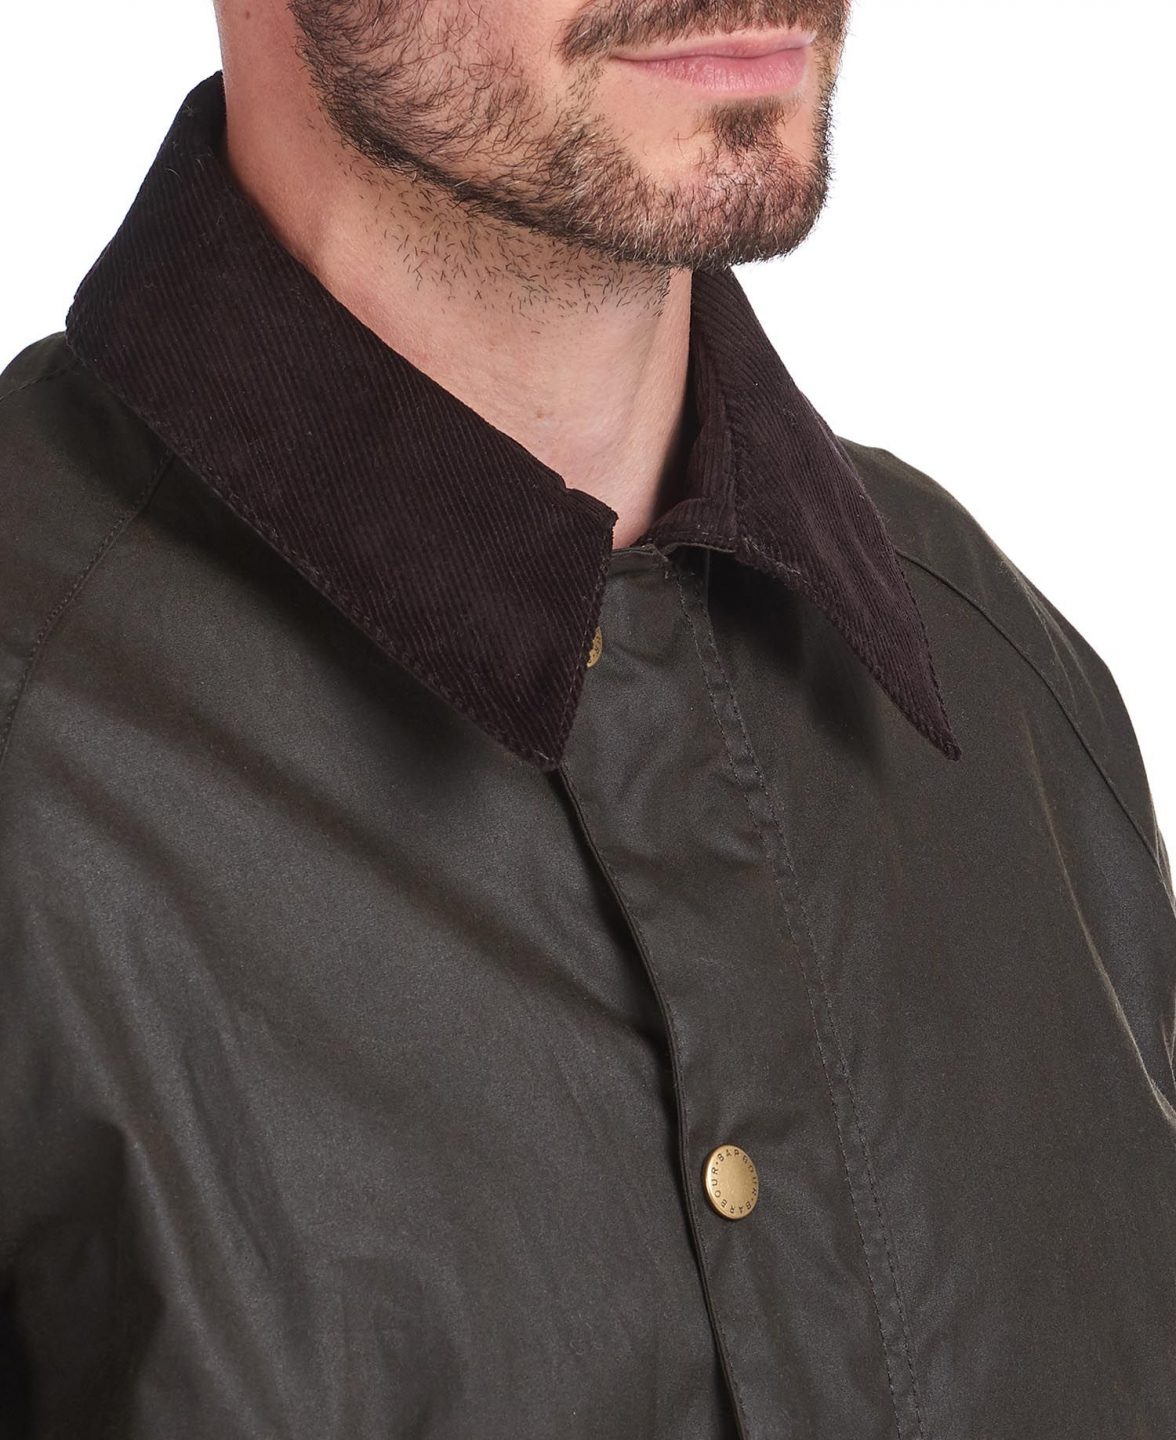 Barbour Ashby Waxed Jacket | Walters of Oxford | Menswear in Oxford